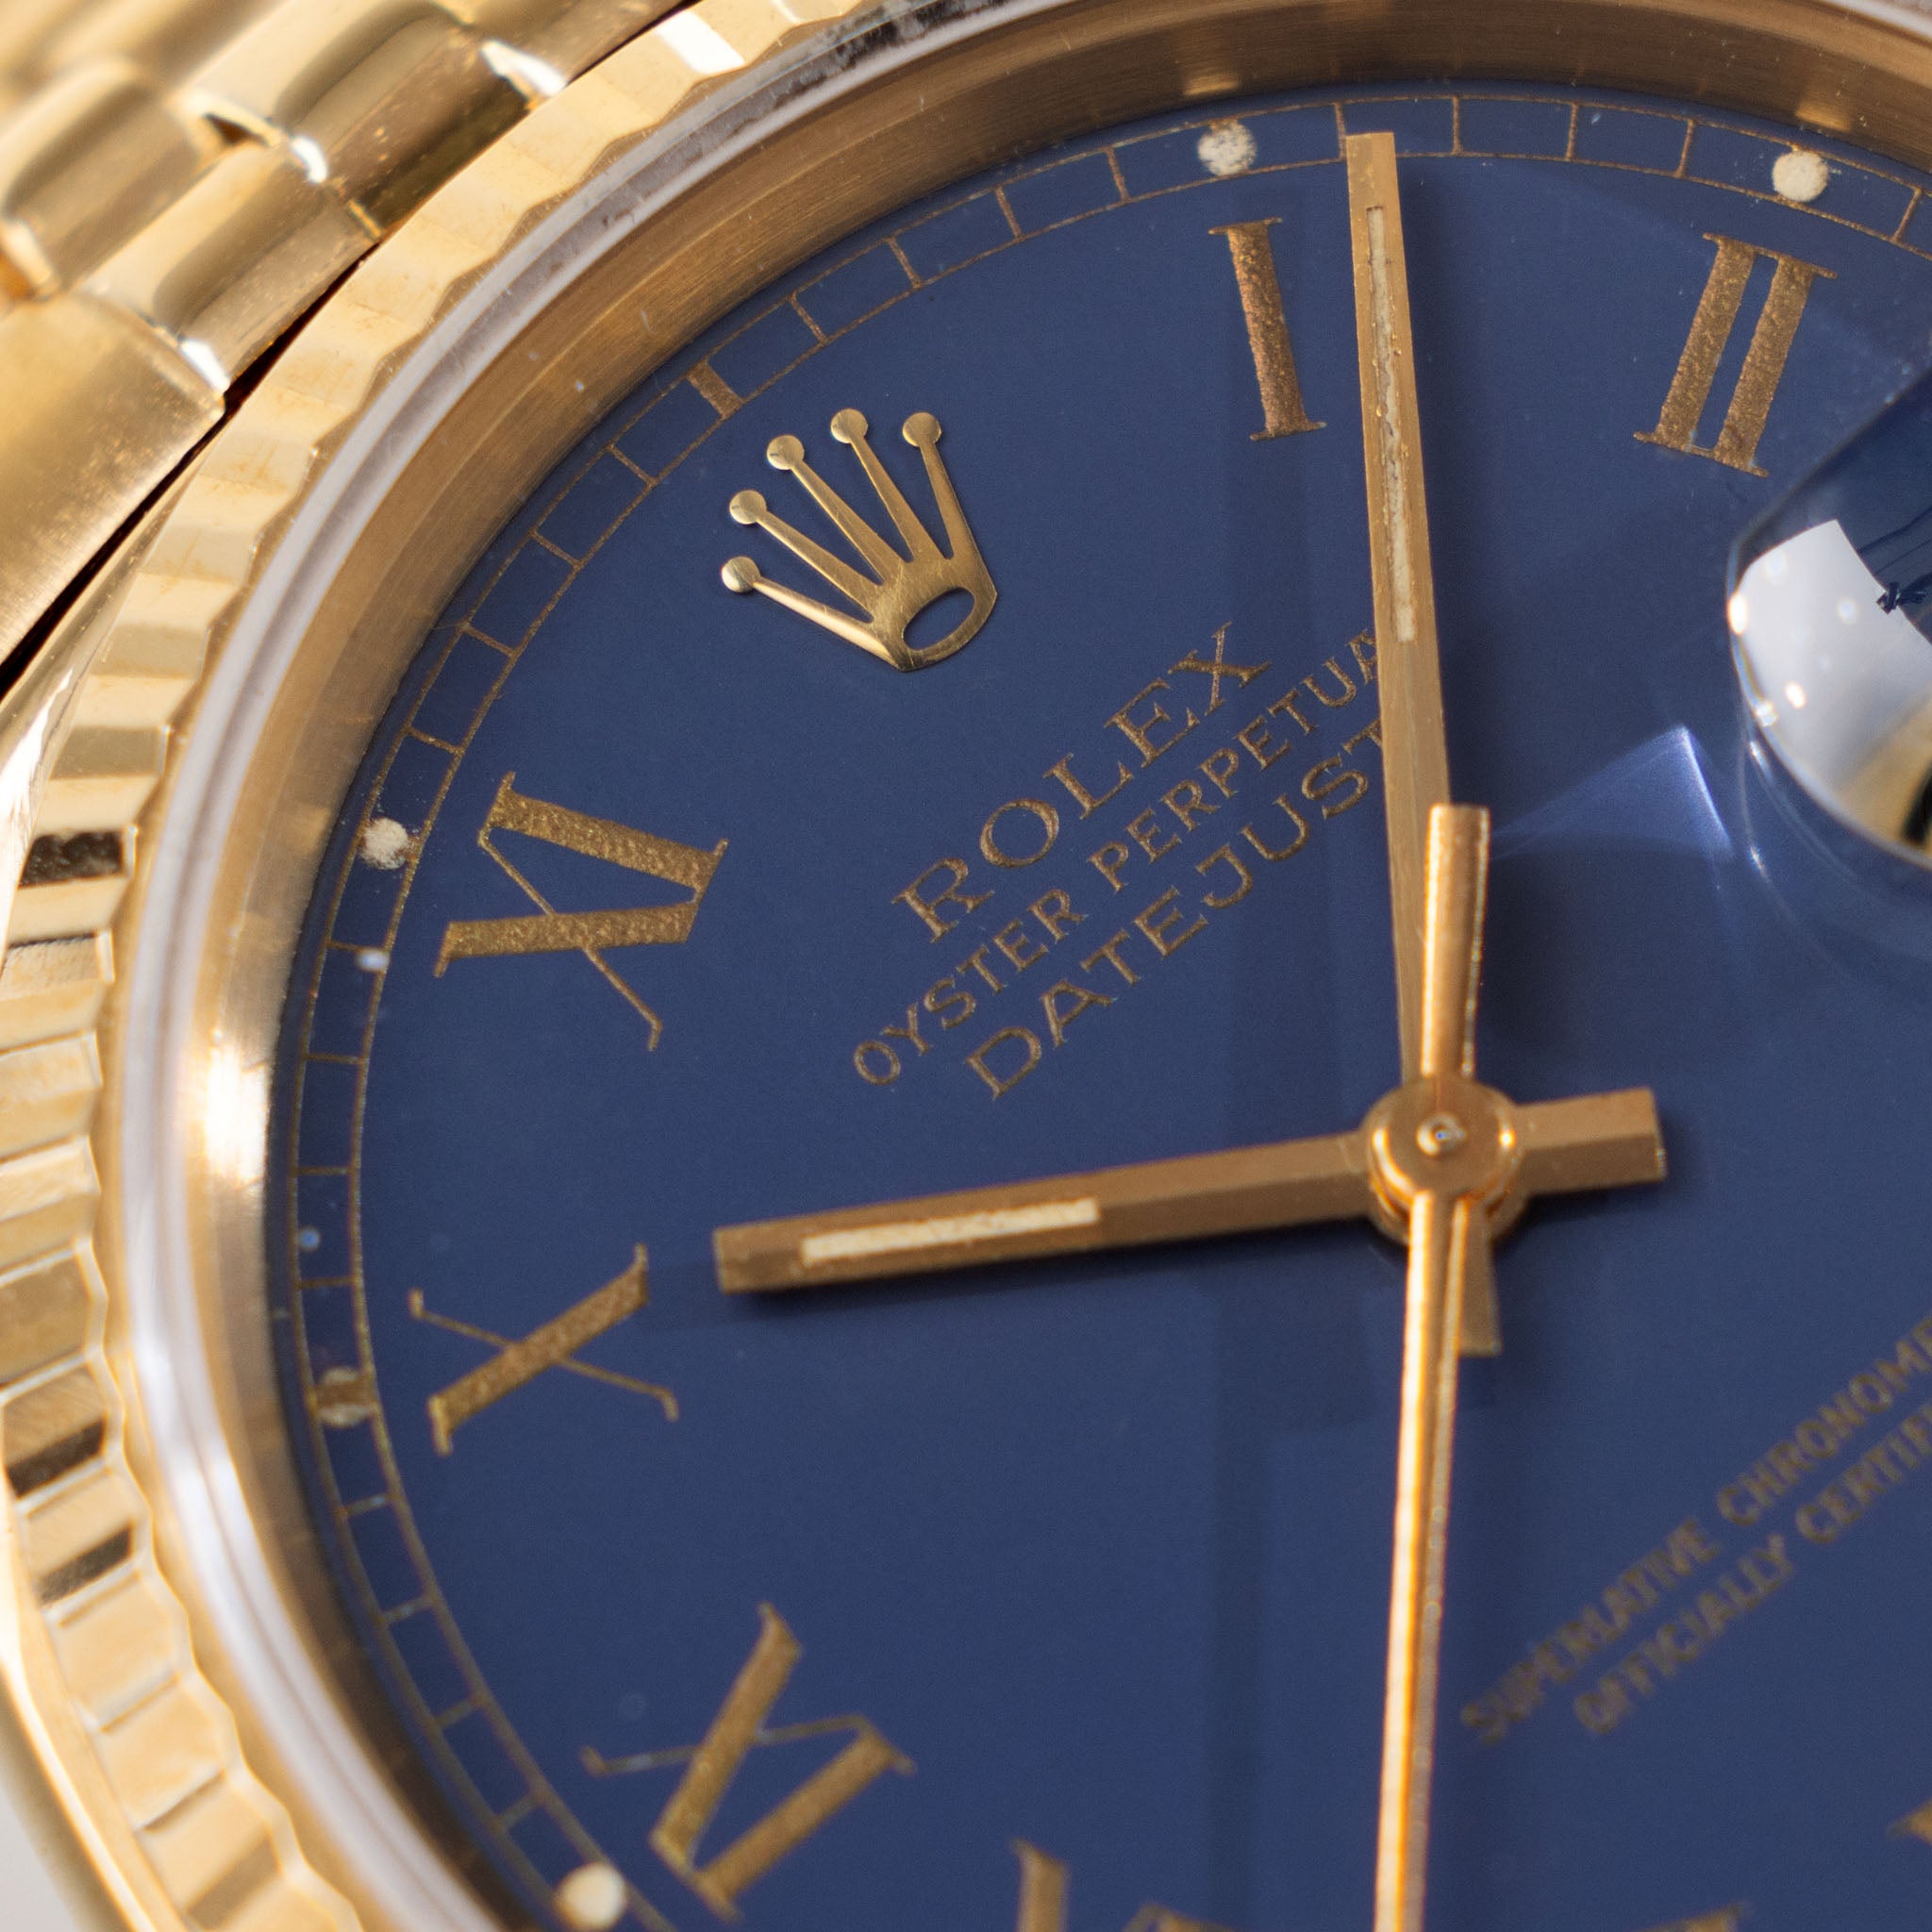 Rolex Datejust Yellow Gold Blue Buckley Dial Ref 16018 